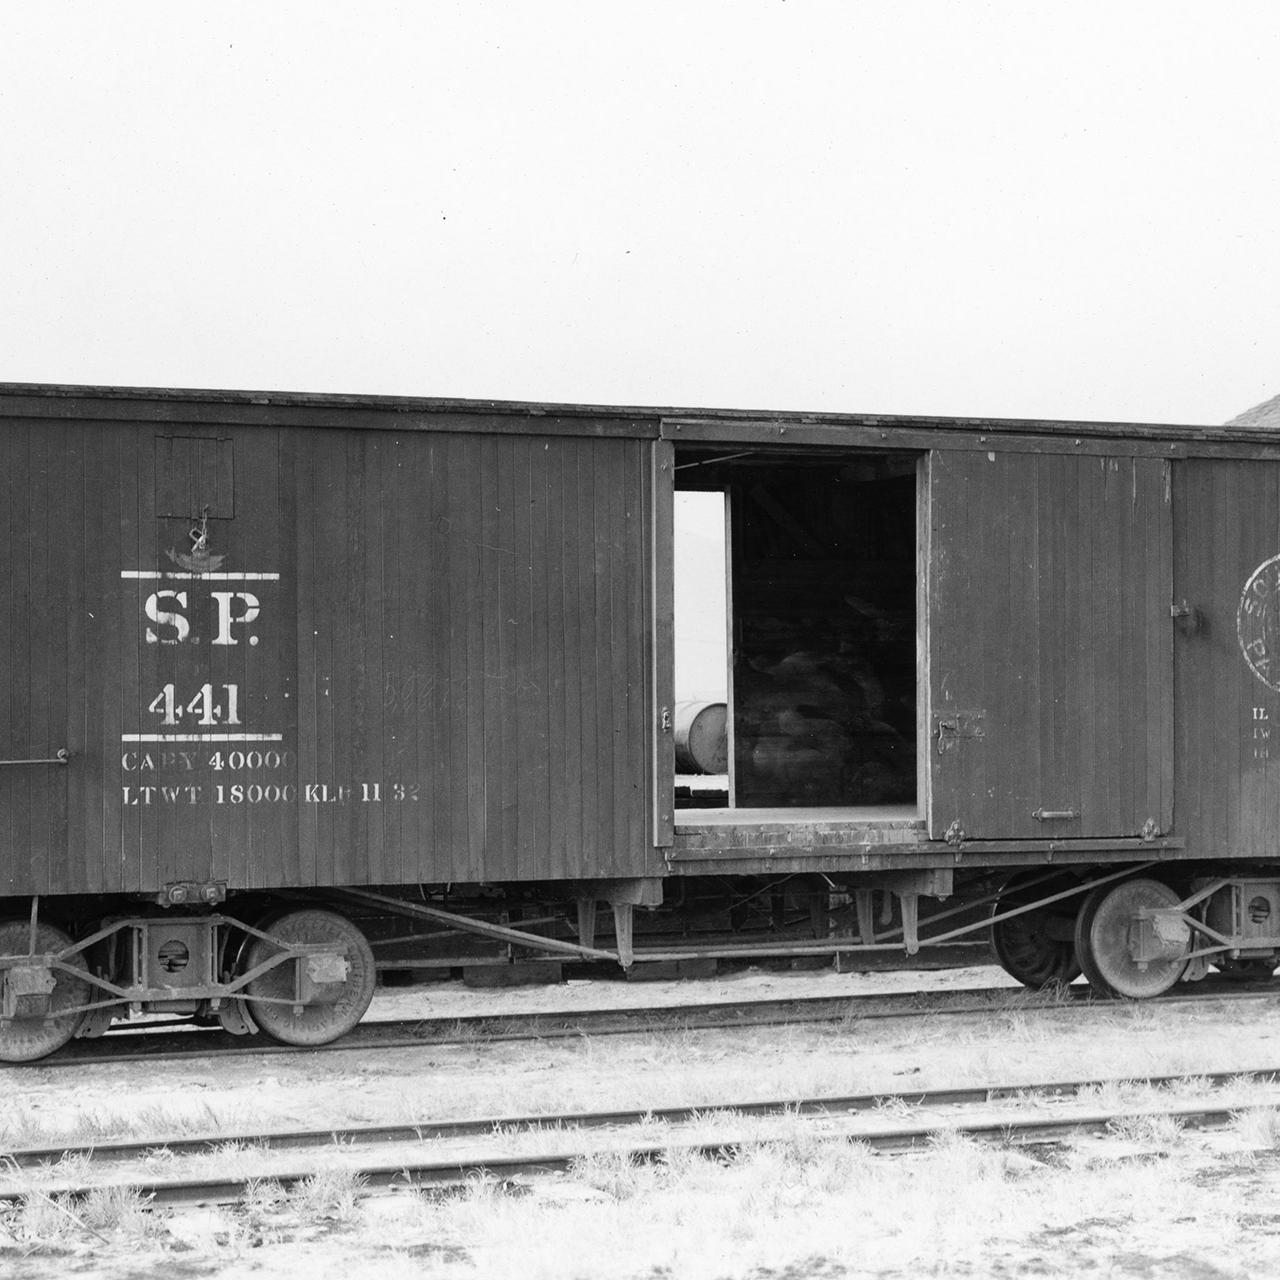 Boxcar #441 in Laws, 1939.